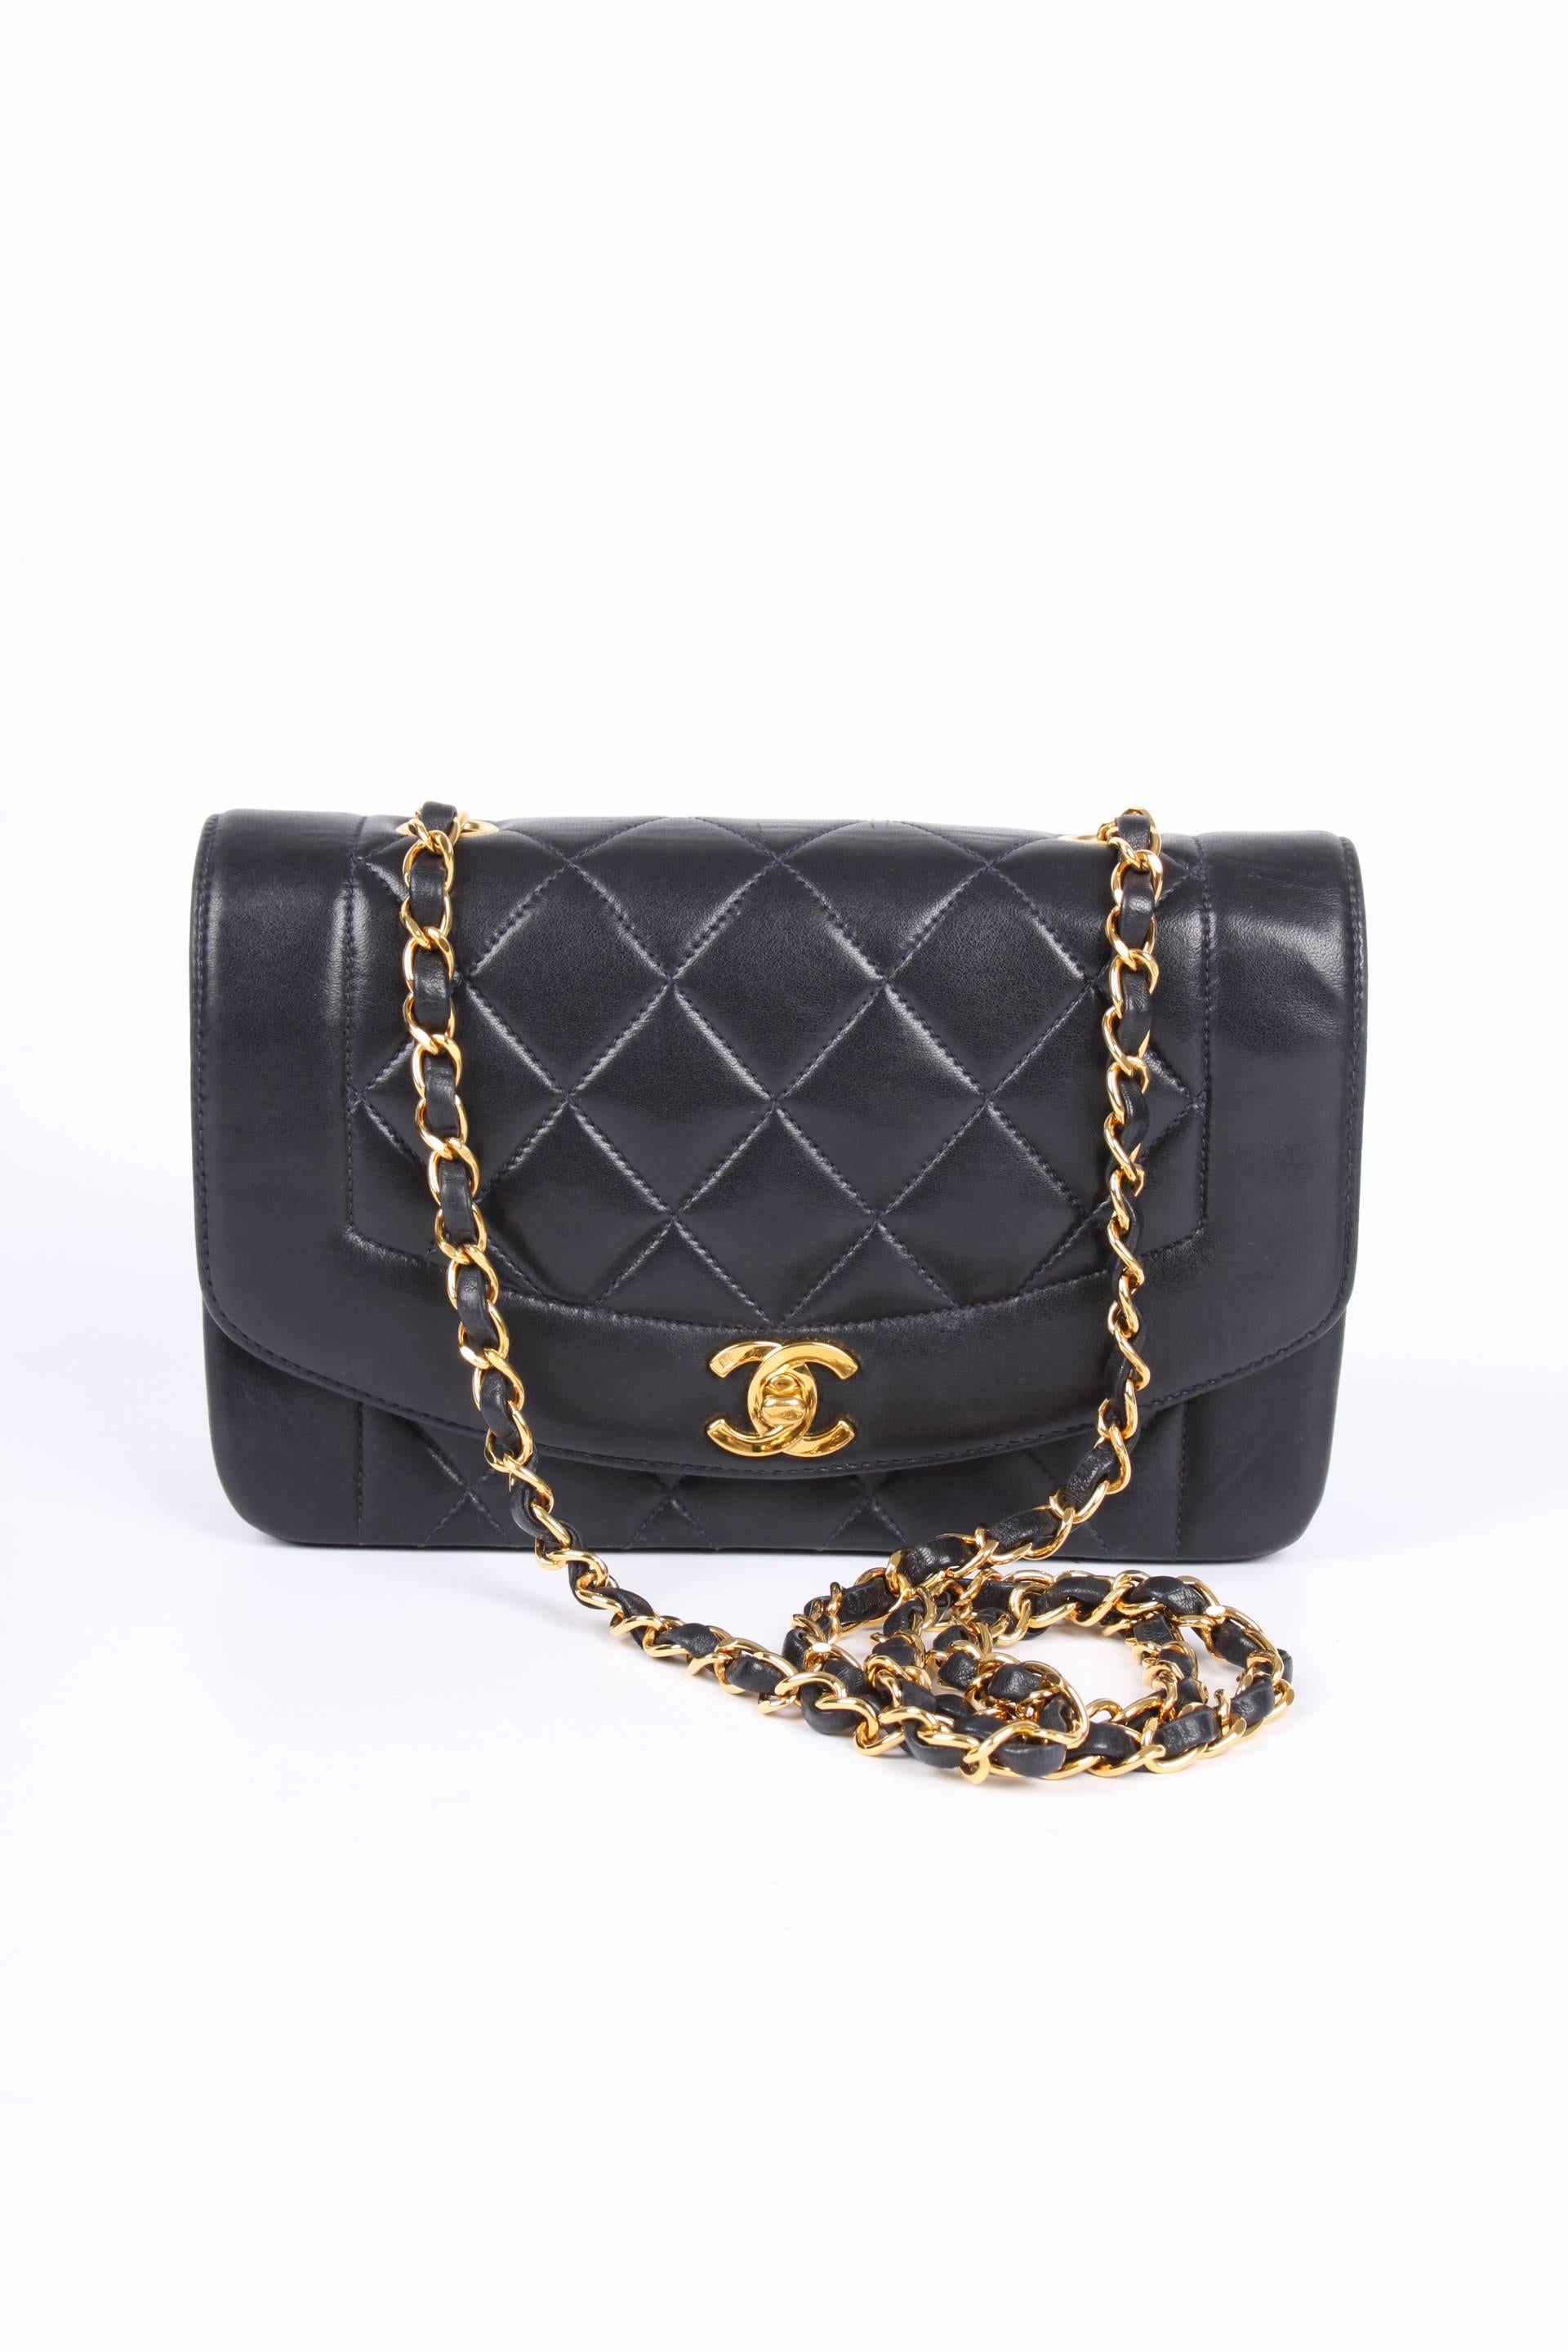 A real gem! The Diana Bag by Chanel from 1995 in dark blue leather, stunning!

This bag was an essential part of the look of Lady Diana, she wore it quite a lot. Karl Lagerfeld then decided to name this bag after the popular princess.

This model